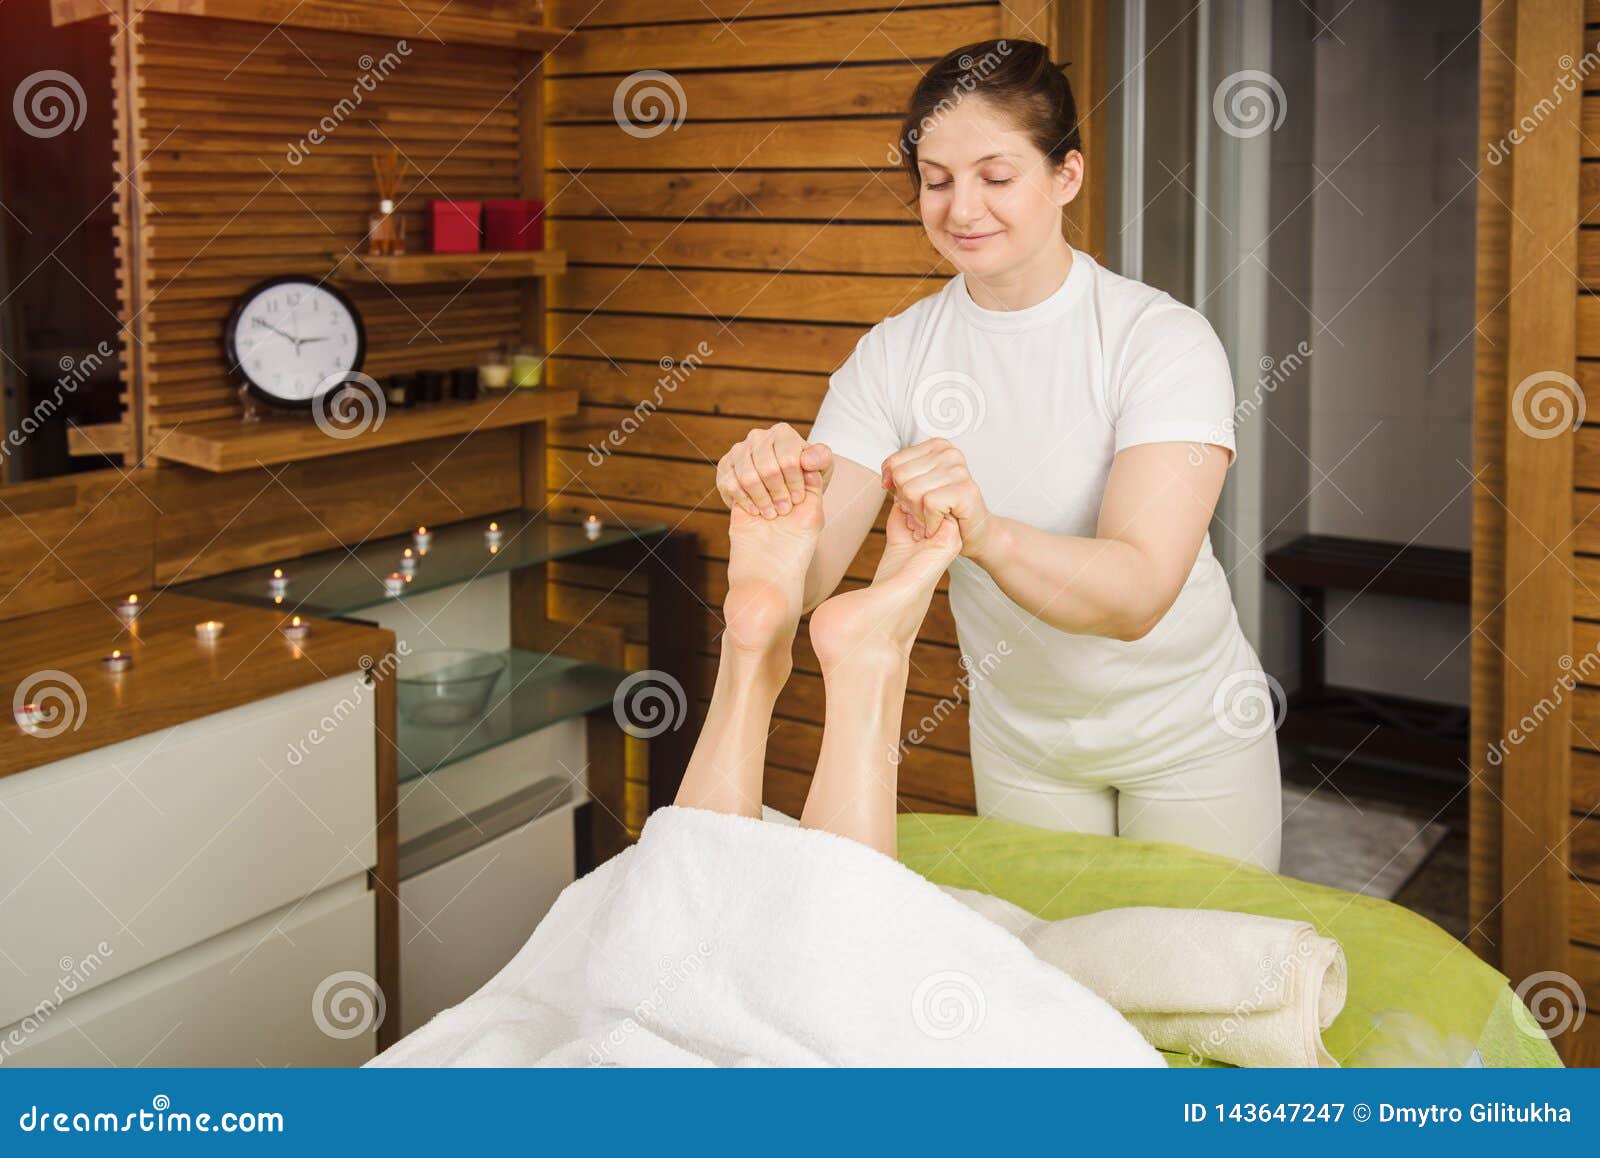 Woman Having Traditional Foot Massage Stock Image Image Of Foot Person 143647247 